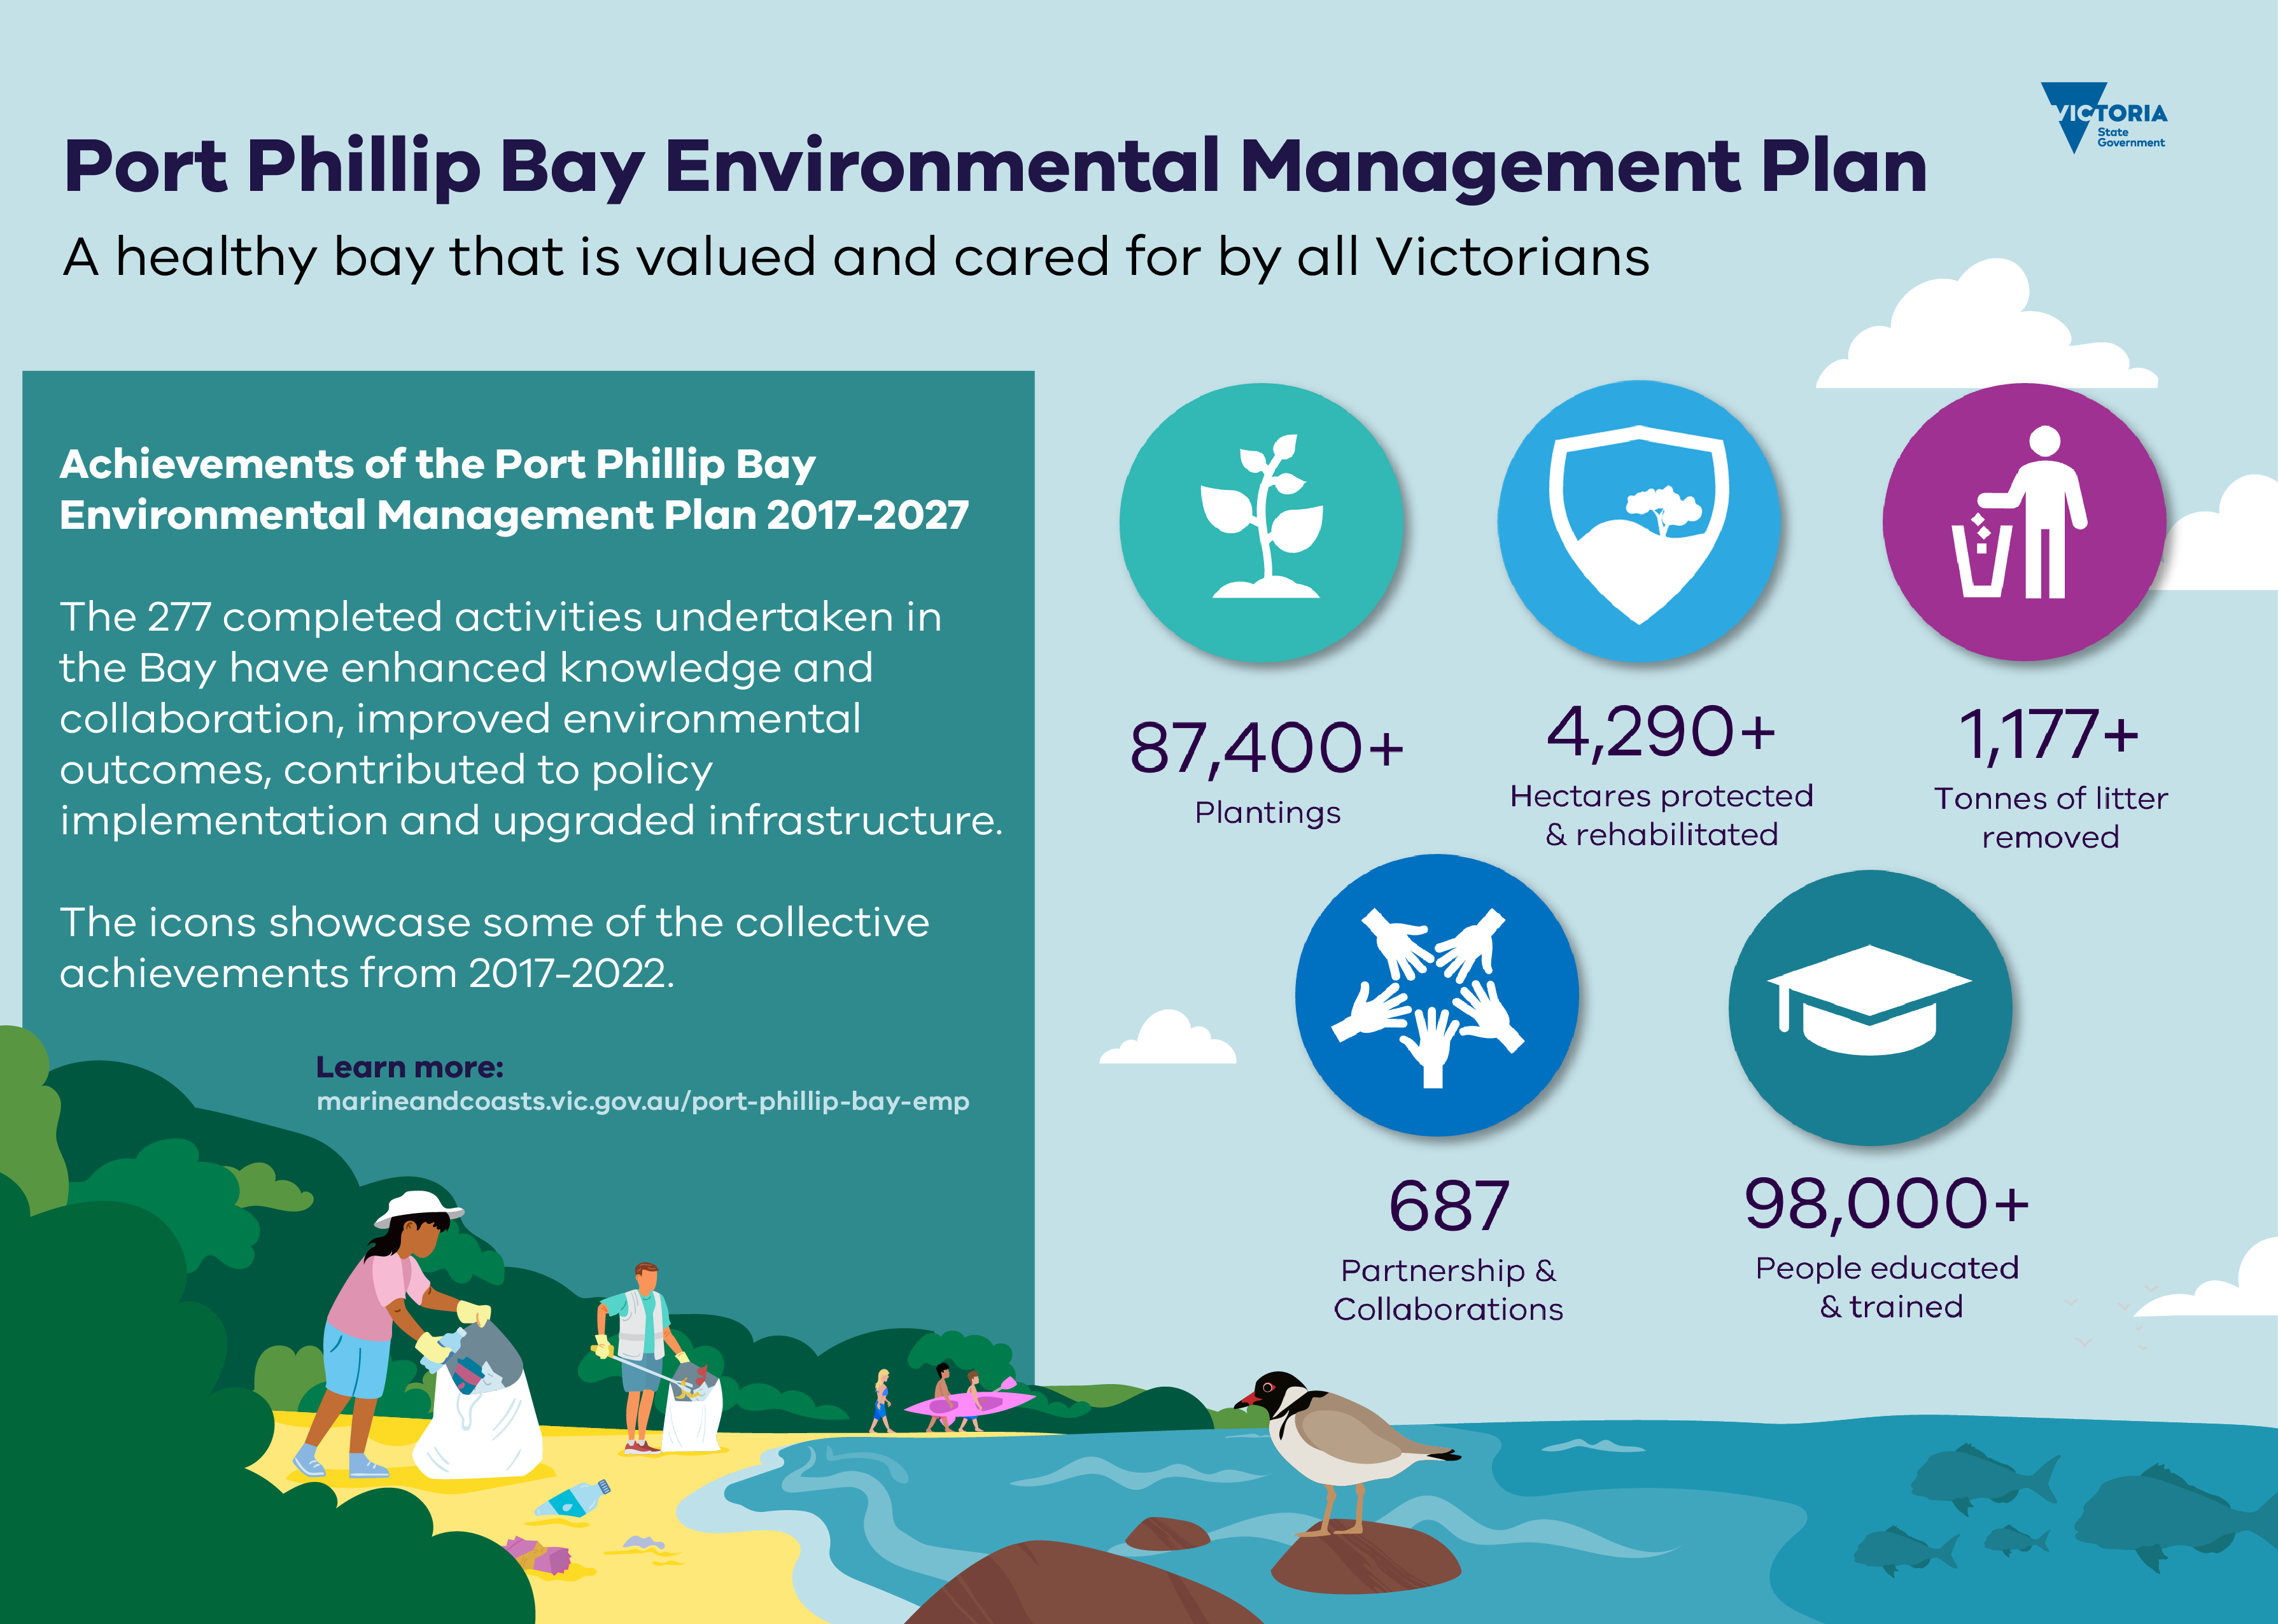 Infographic displayed is of achievements the EMP has achieved from 2017-2022, including 277 activities undertaken, 87400+ plantings, 4290+ hectares rehabilitated, 1177+ tonnes of litter removed, 67 partnerships and collaborations and 98000+ people educated and trained.